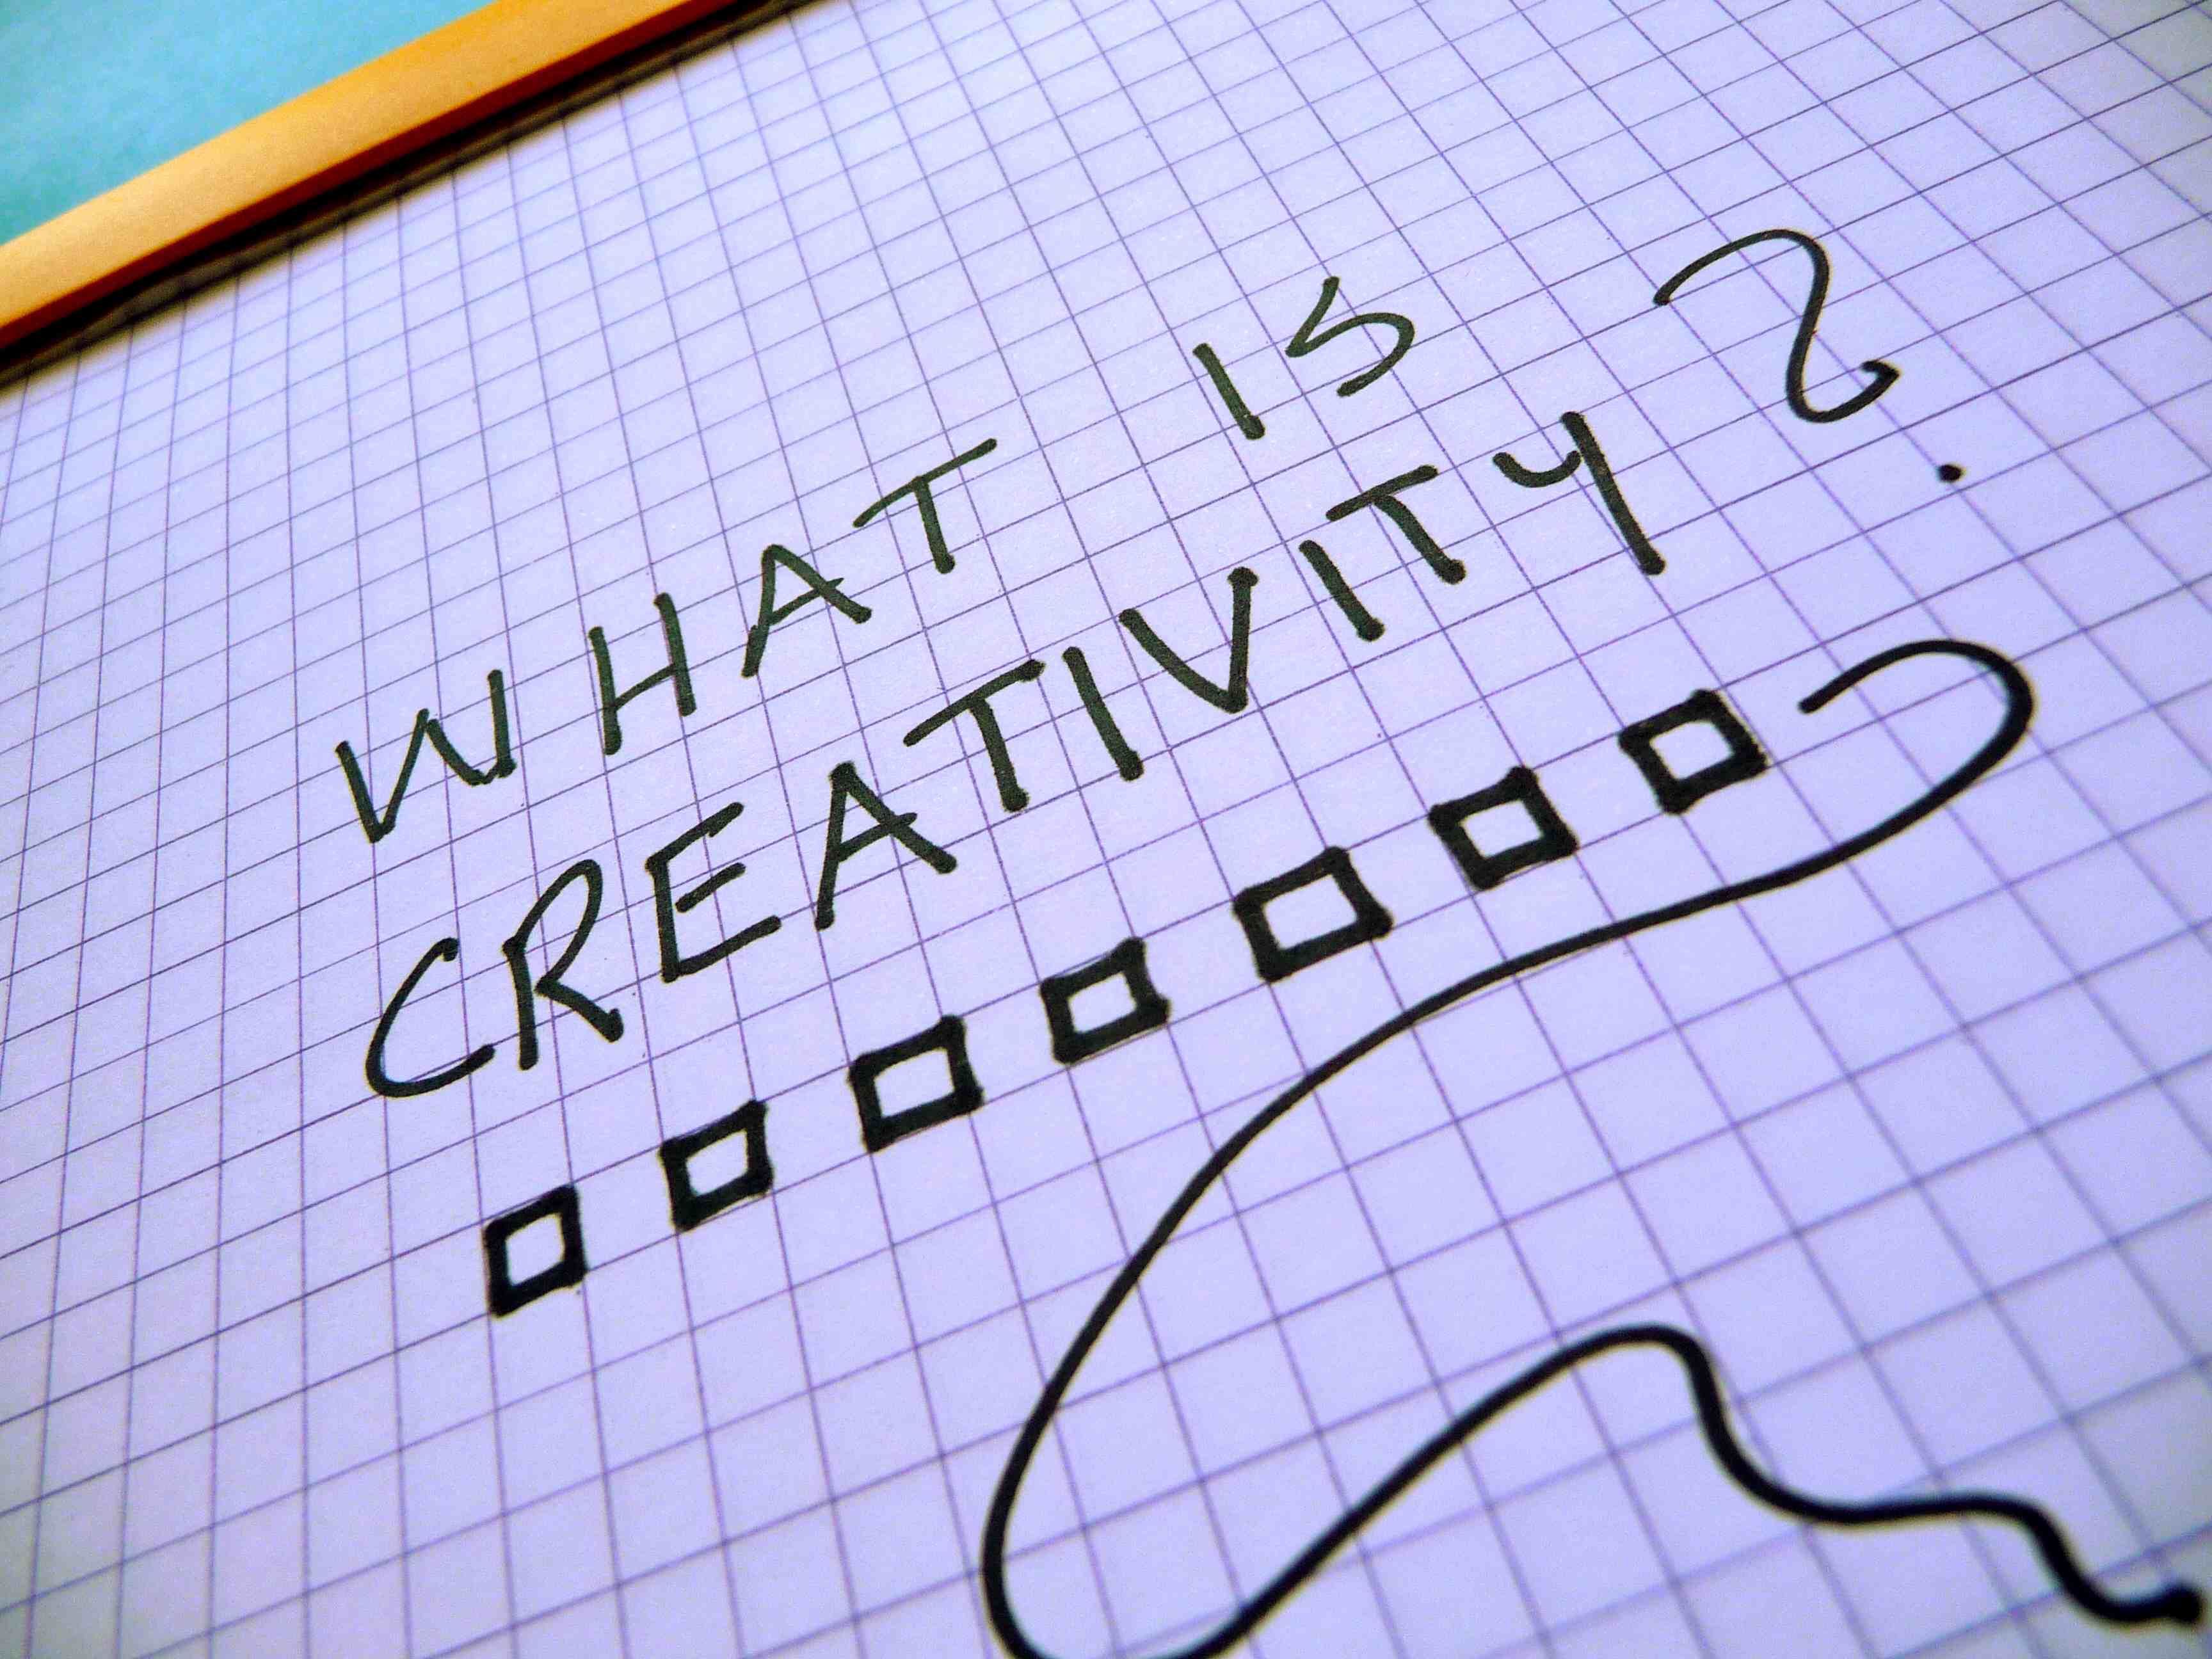 What is creativity to you?